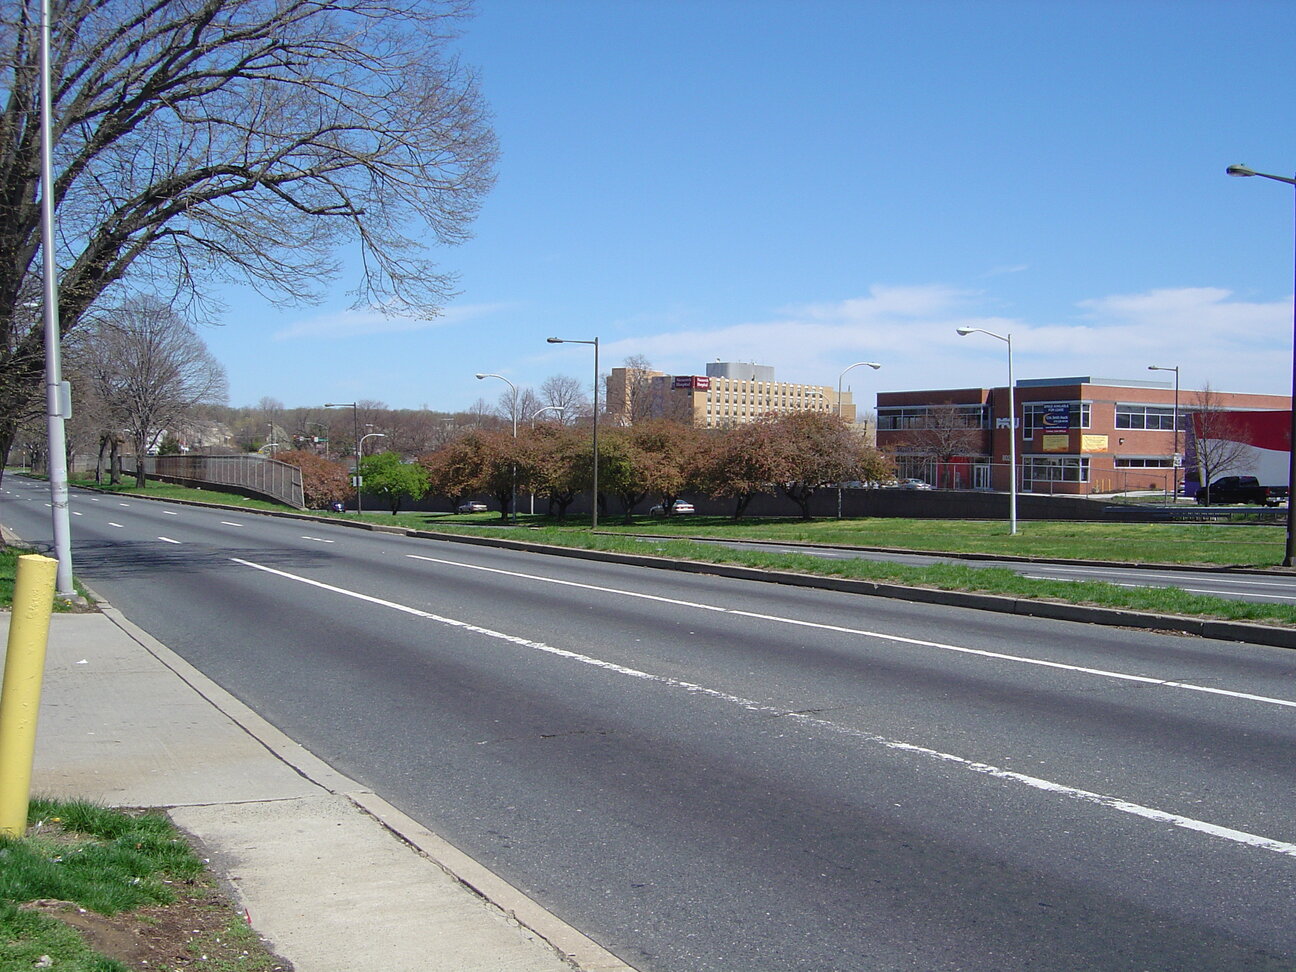 Roosevelt Boulevard at Rhawn Street, looking north toward Pennypack Circle. Photo from Wikimedia Commons.